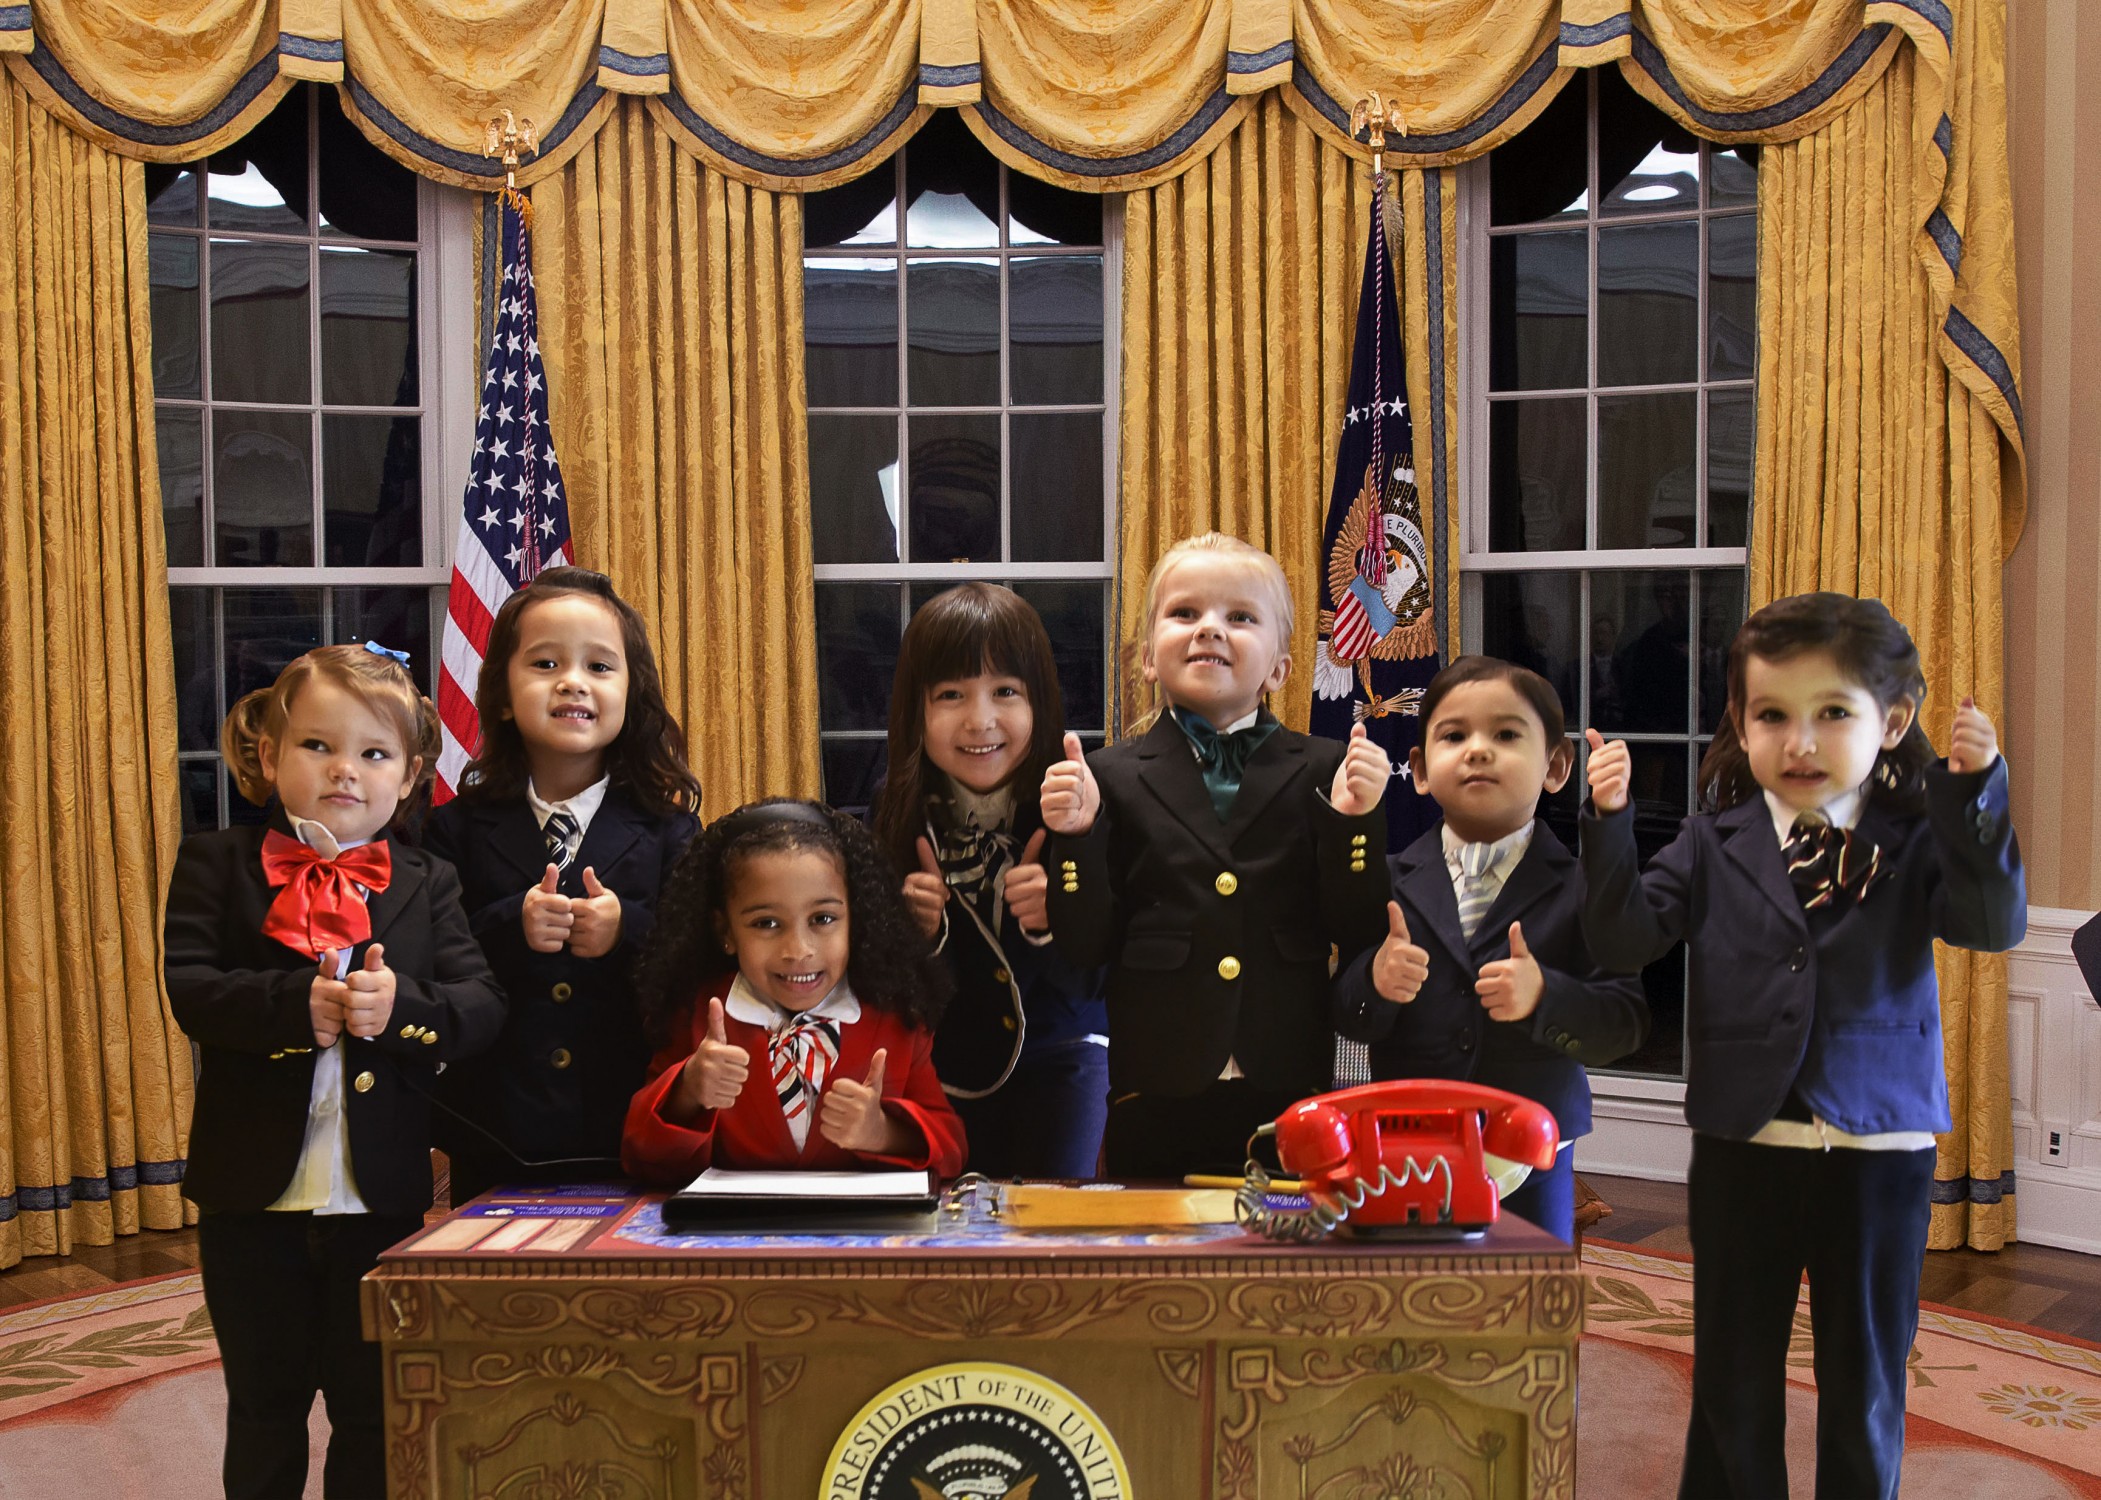 Washington, USA. 1st February, 2017. General views of the Oval Office in the White House in Washington, DC, USA. Credit:Michael Reynolds/Pool via CNP /MediaPunch